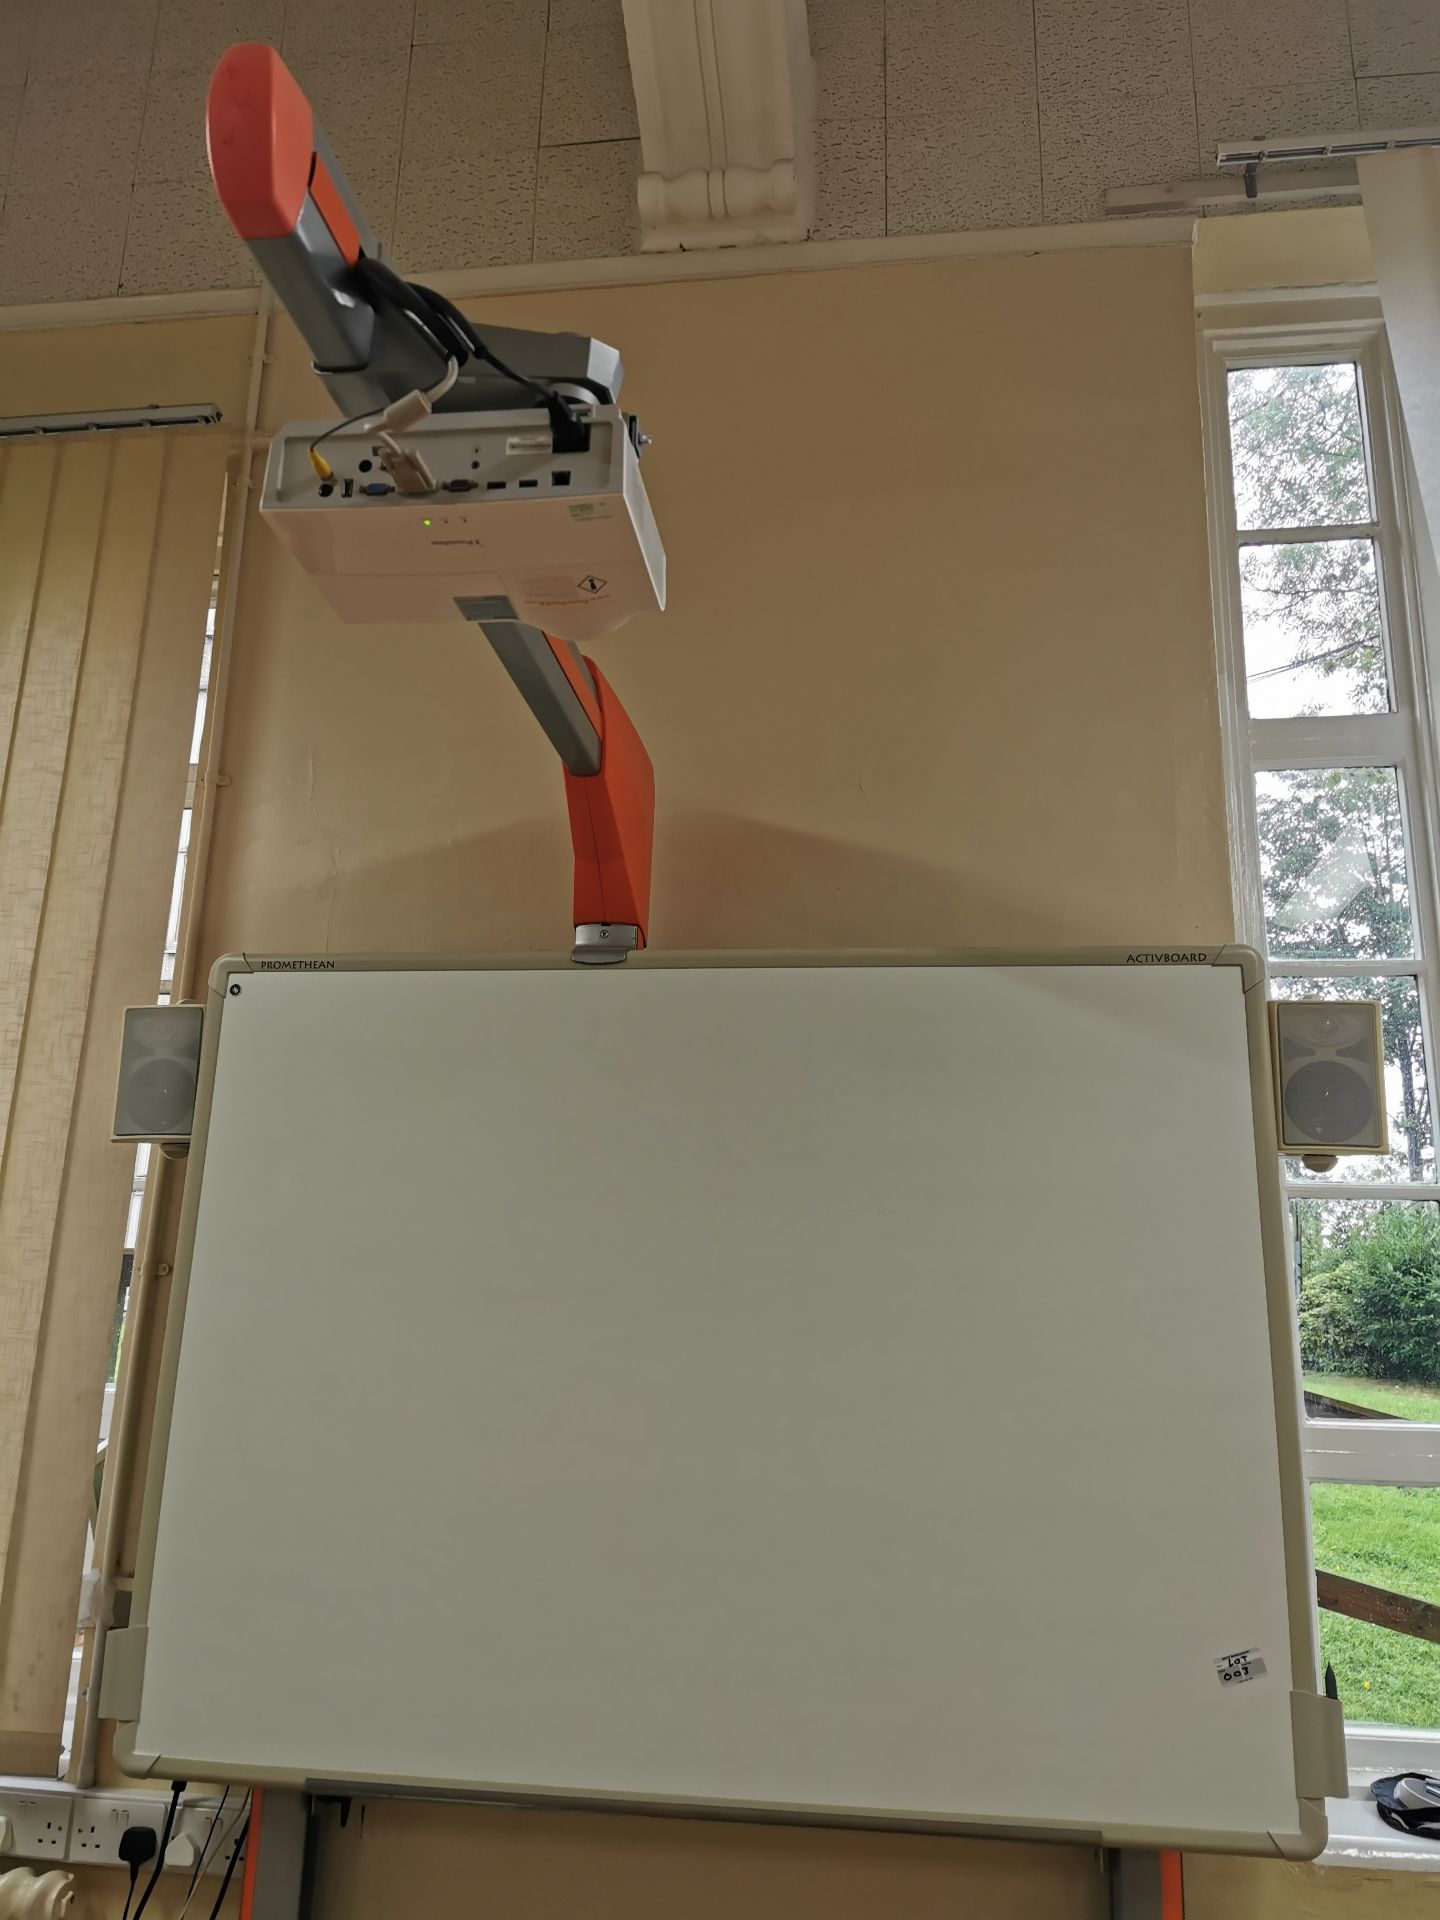 Promethean active board & projector on stand